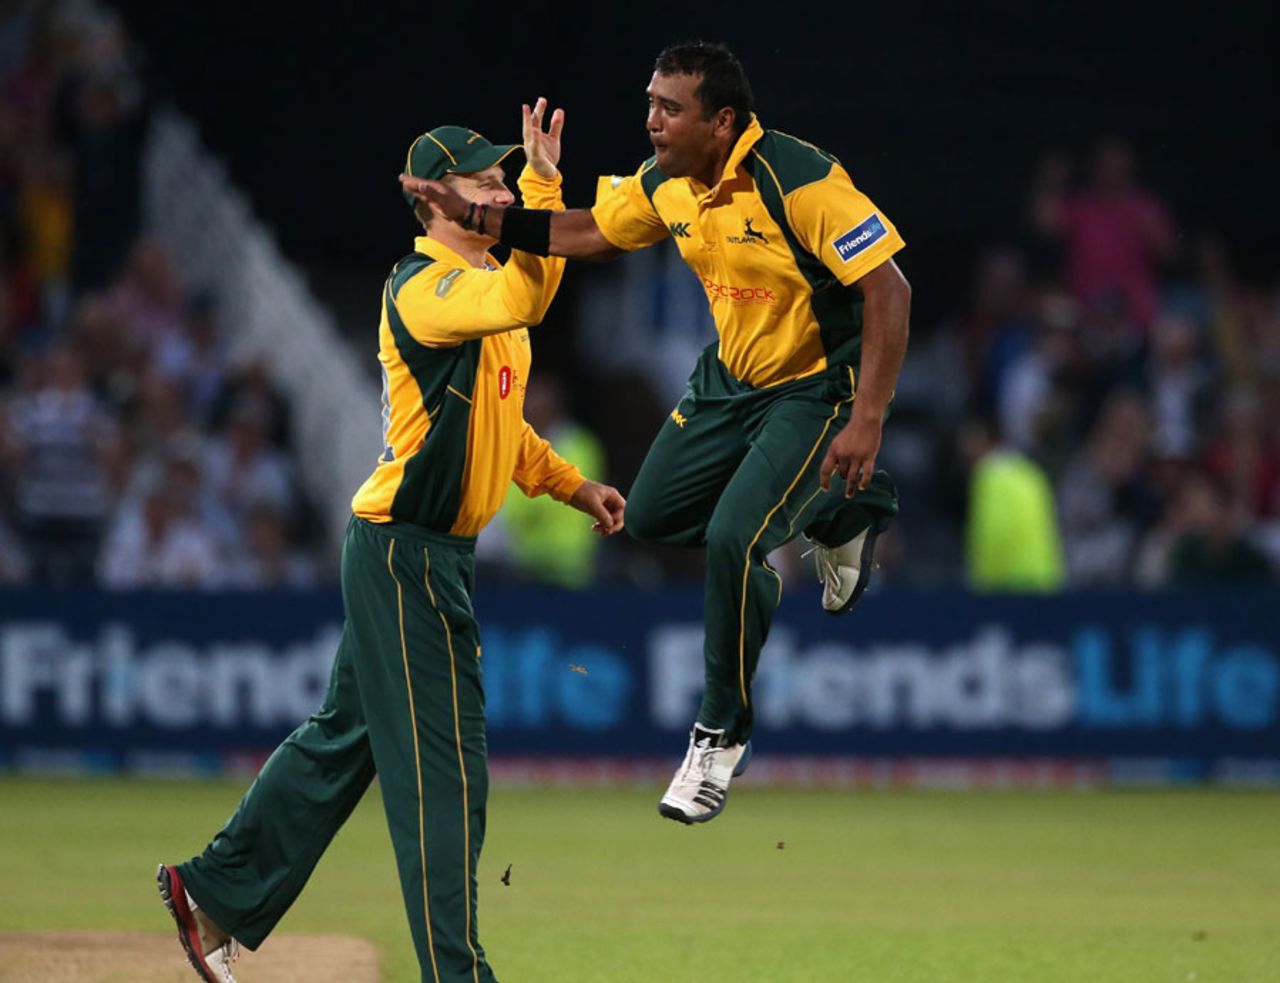 Samit Patel opened the bowling and picked up three wickets, Nottinghamshire v Hampshire, FLt20 quarter-final, Trent Bridge, July 25, 2012